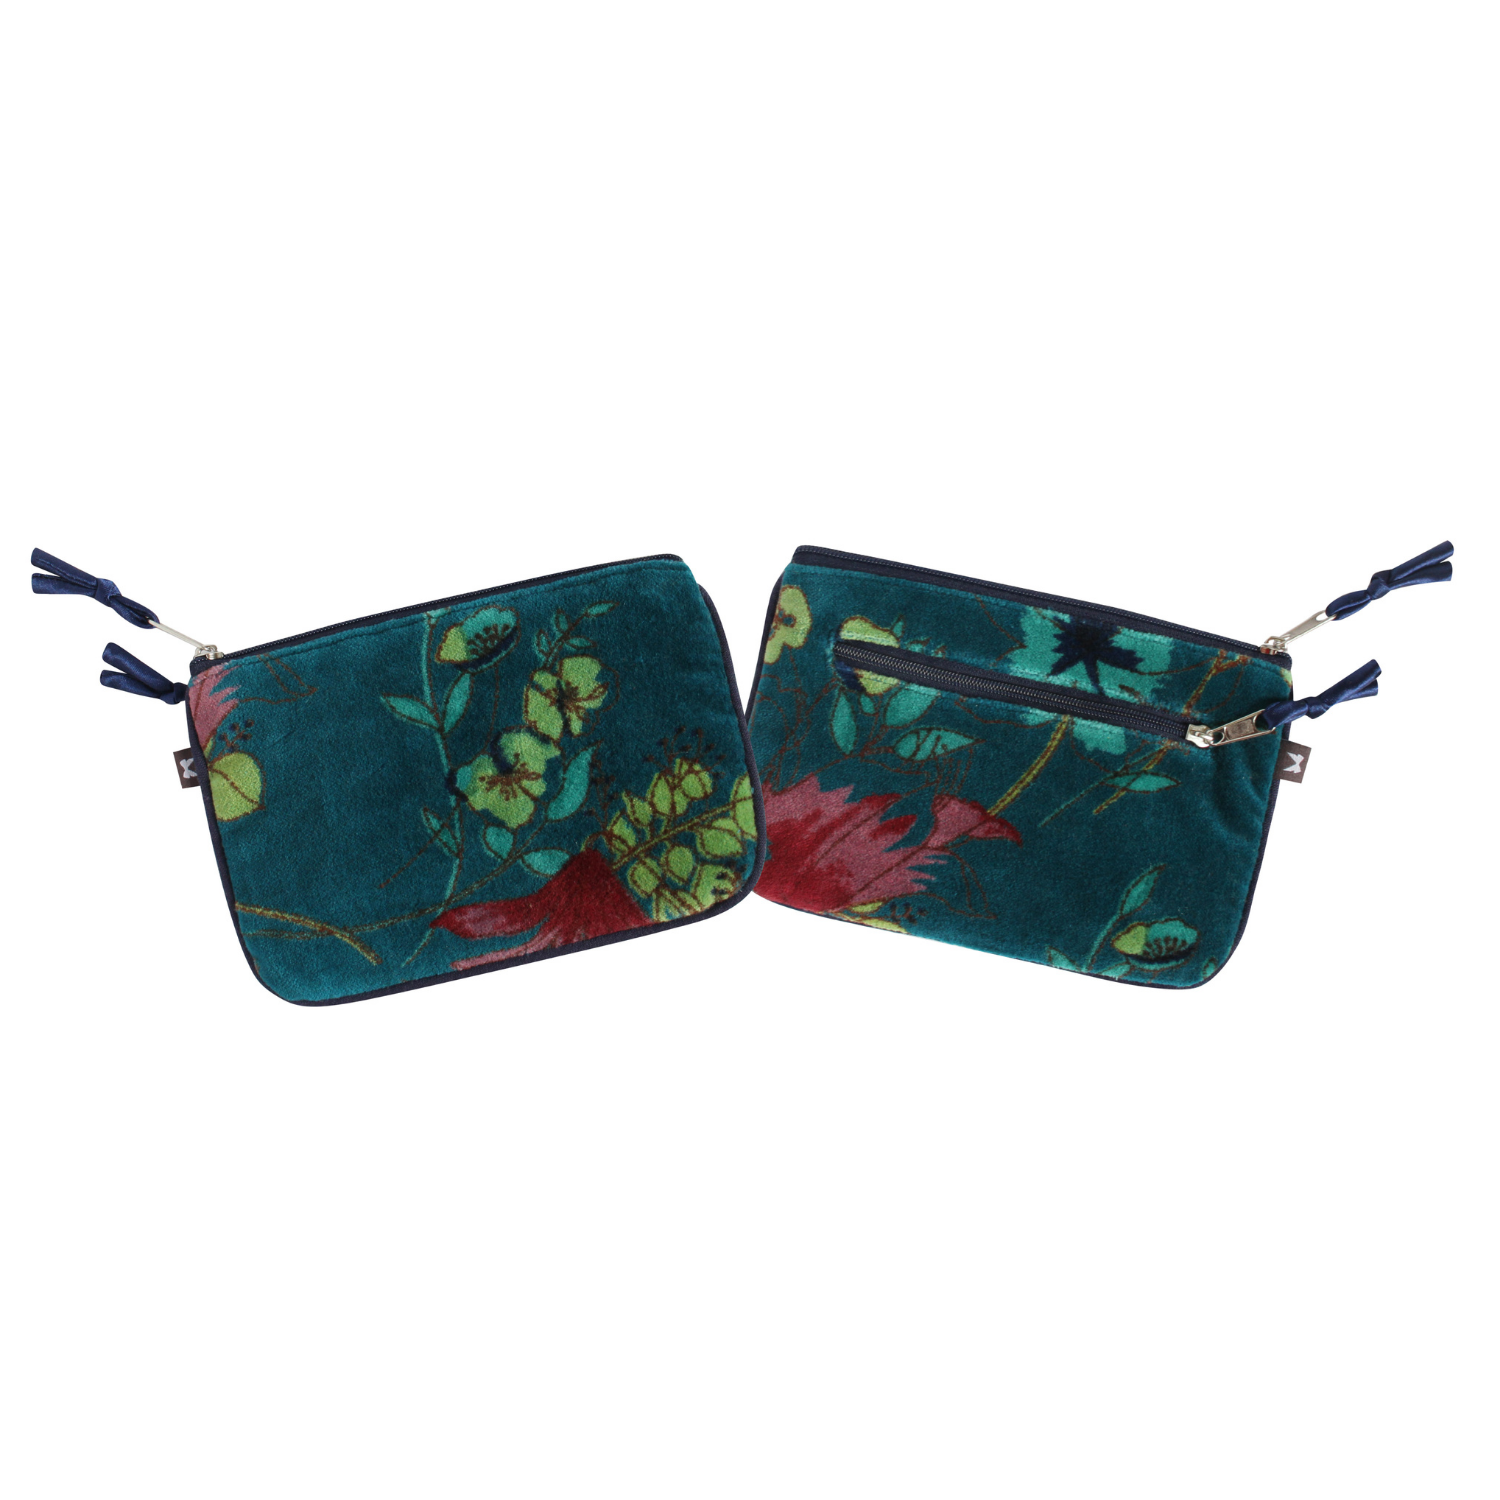 Printed Velvet Juliet Purse by Earth Squared